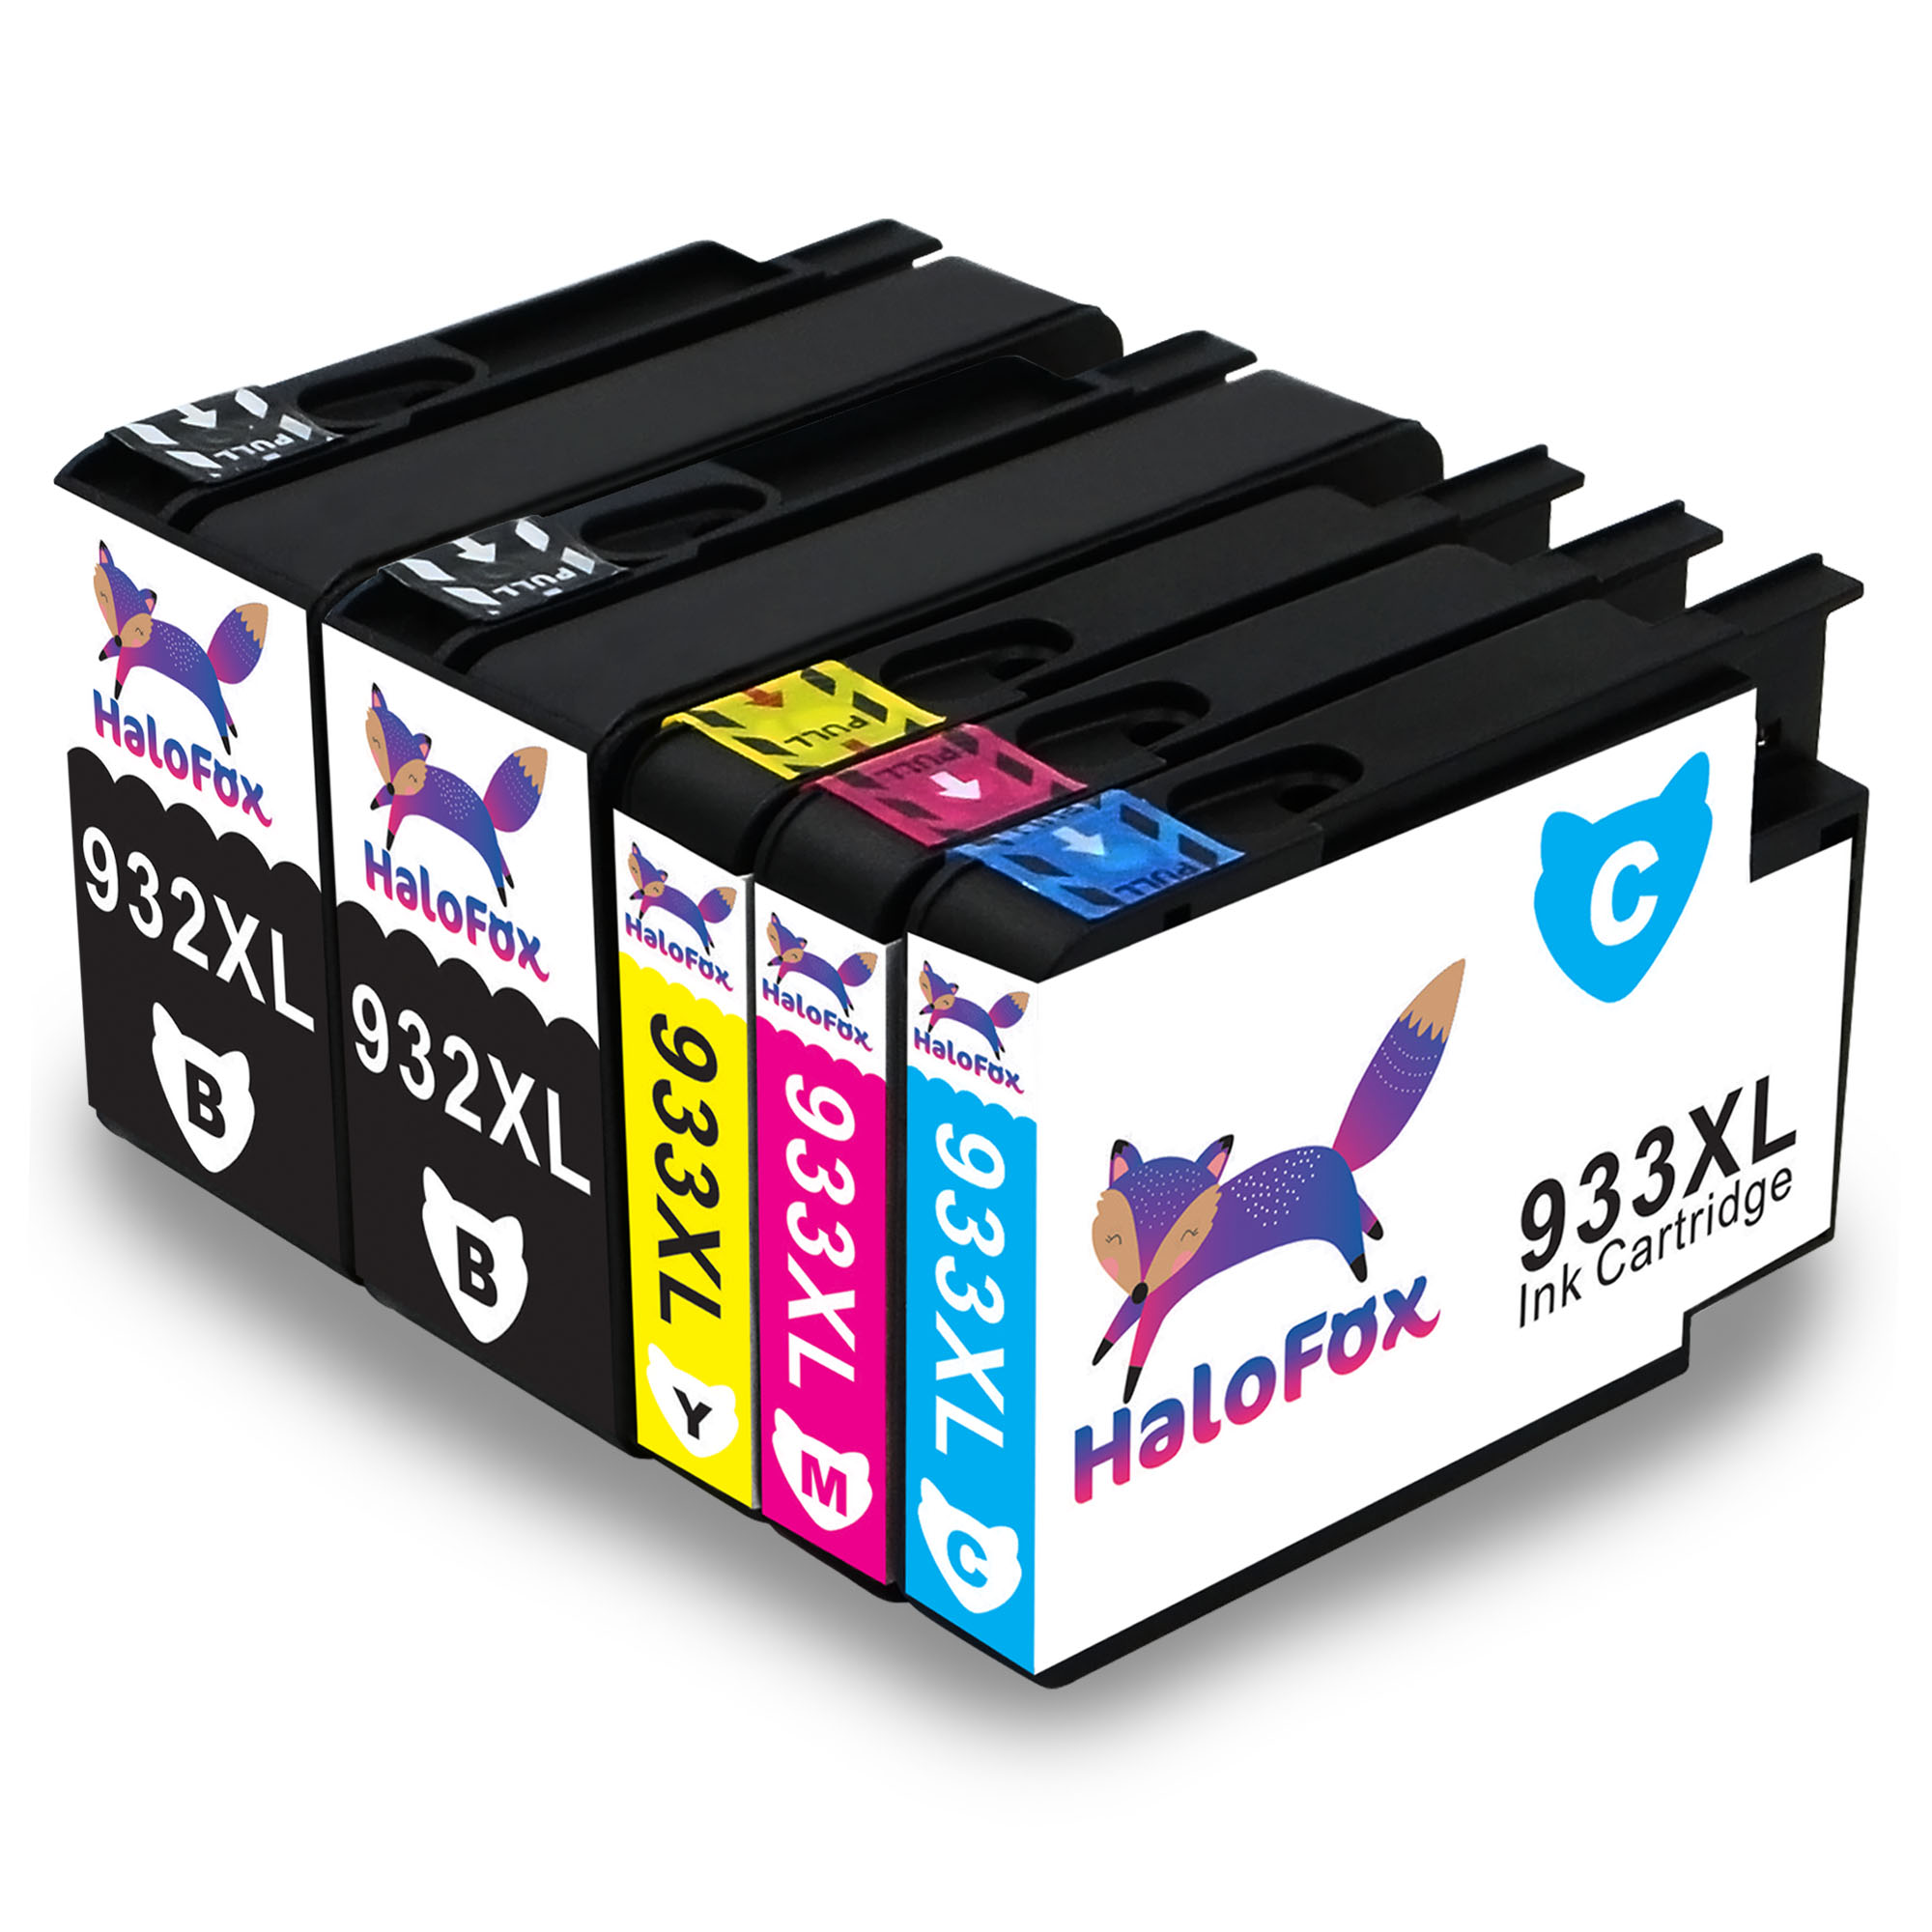 5PK (2BX+CMY) Compatible Ink Cartridges for HP 932XL 933XL for HP Officejet 6100 6700 7610 